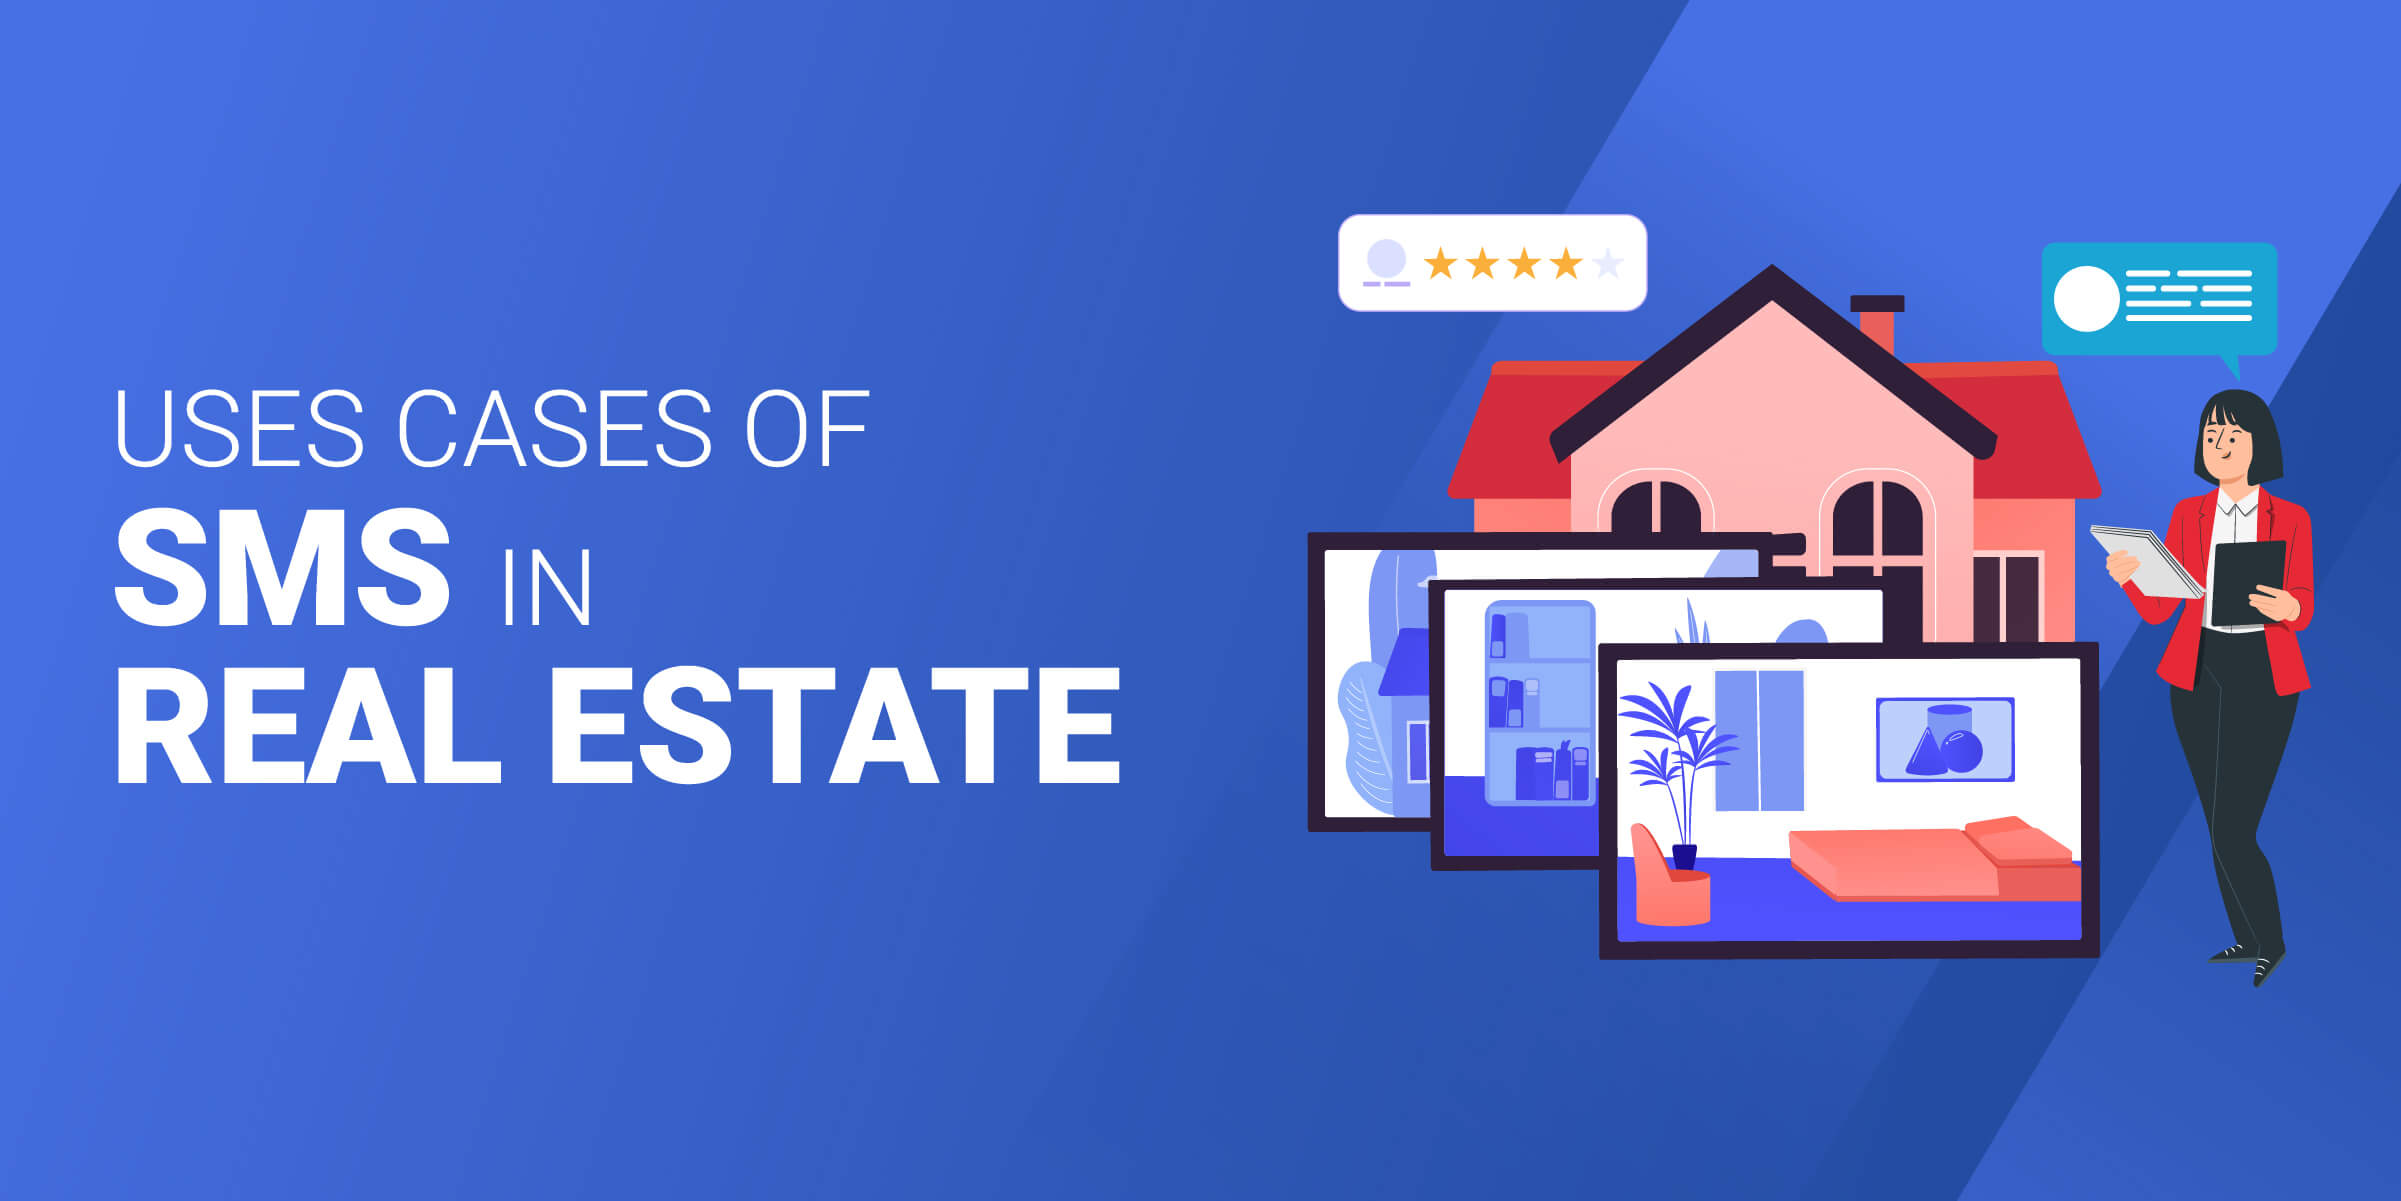 Use Cases of SMS in Real Estate